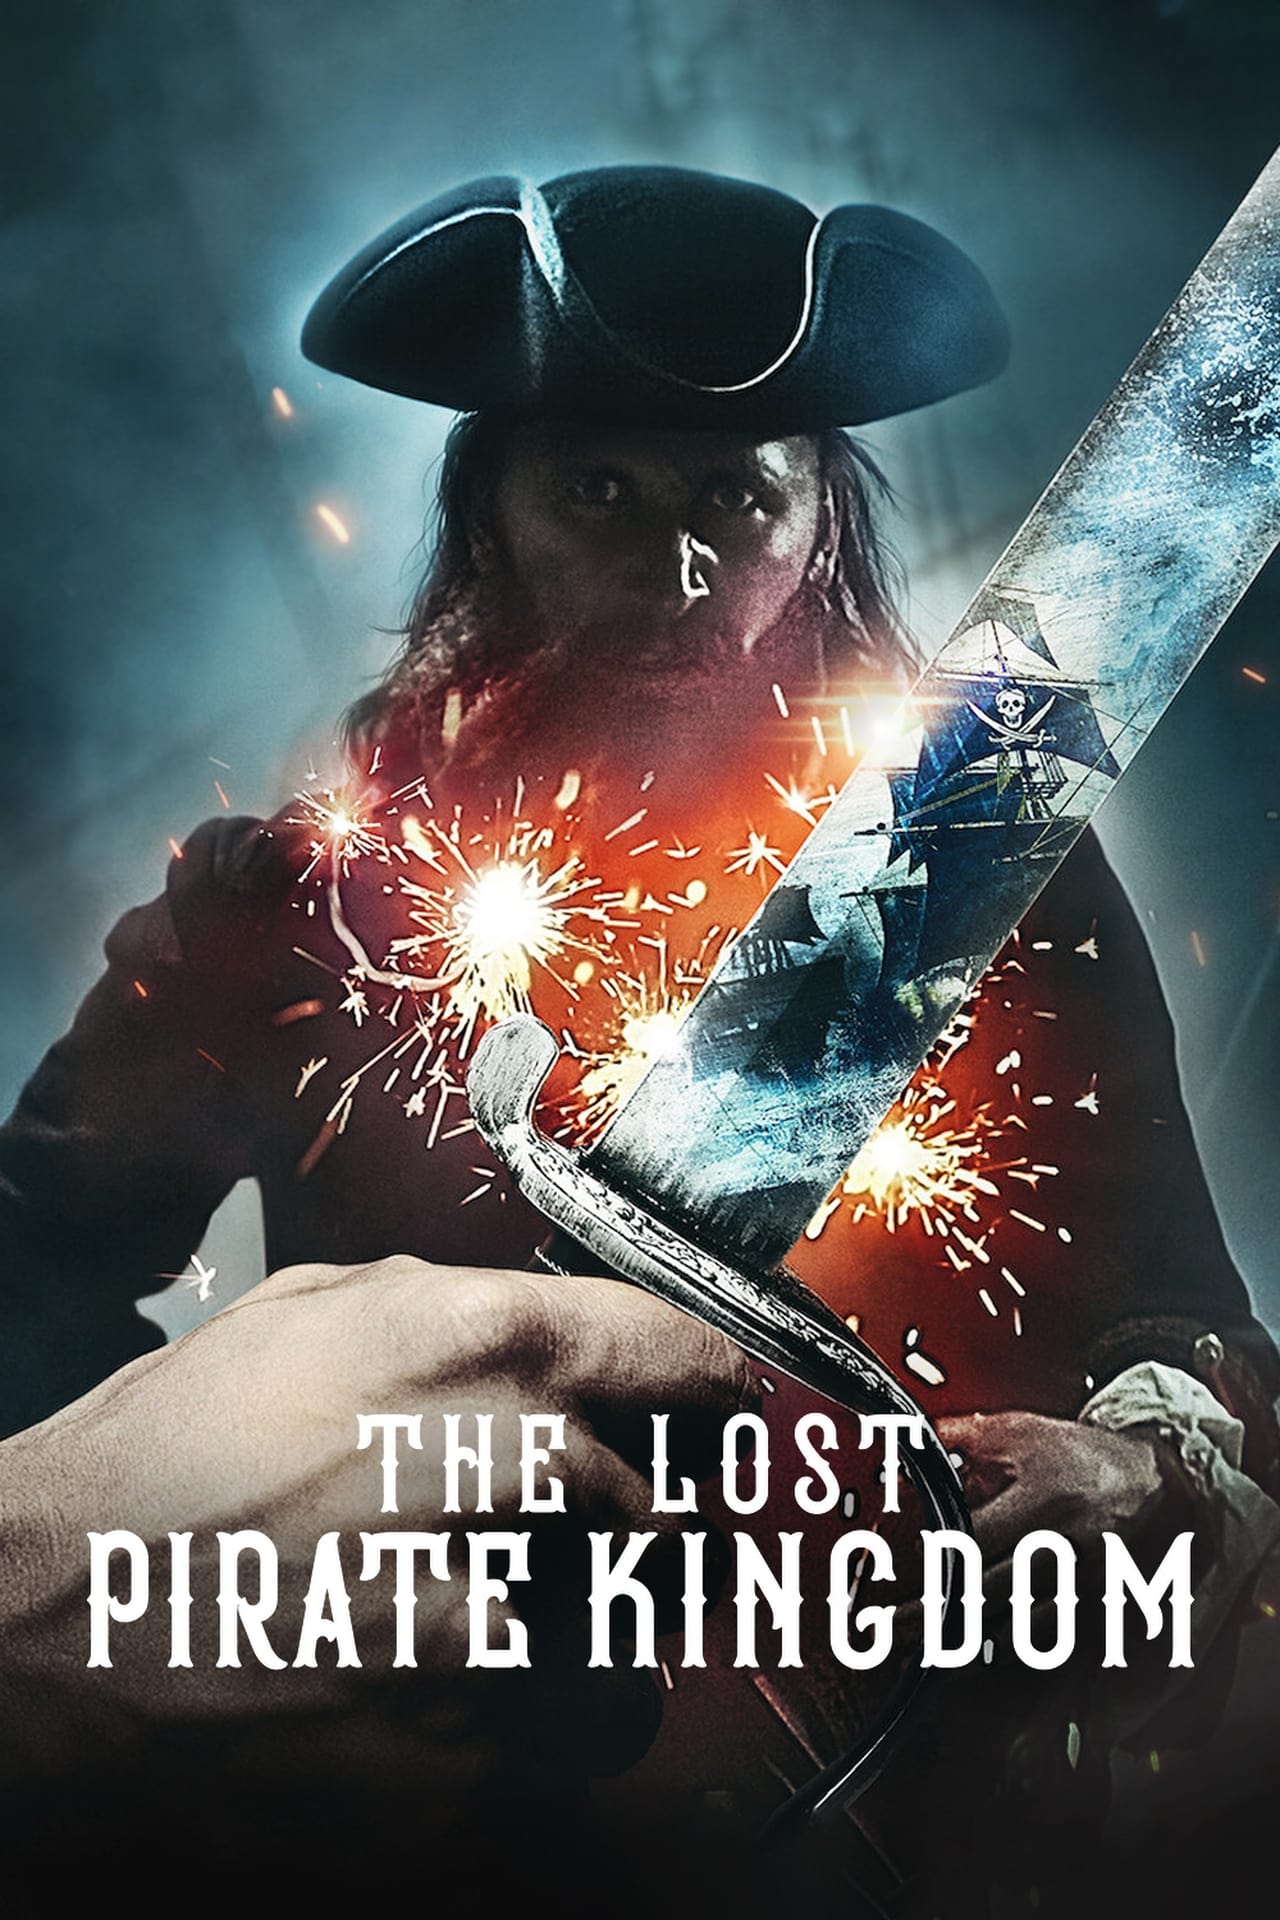 The Lost Pirate Kingdom (2021) S1 EP3 The Price of Loyalty 640Kbps 25Fps 48Khz 5.1Ch DD+ NF E-AC3 Turkish Audio TAC